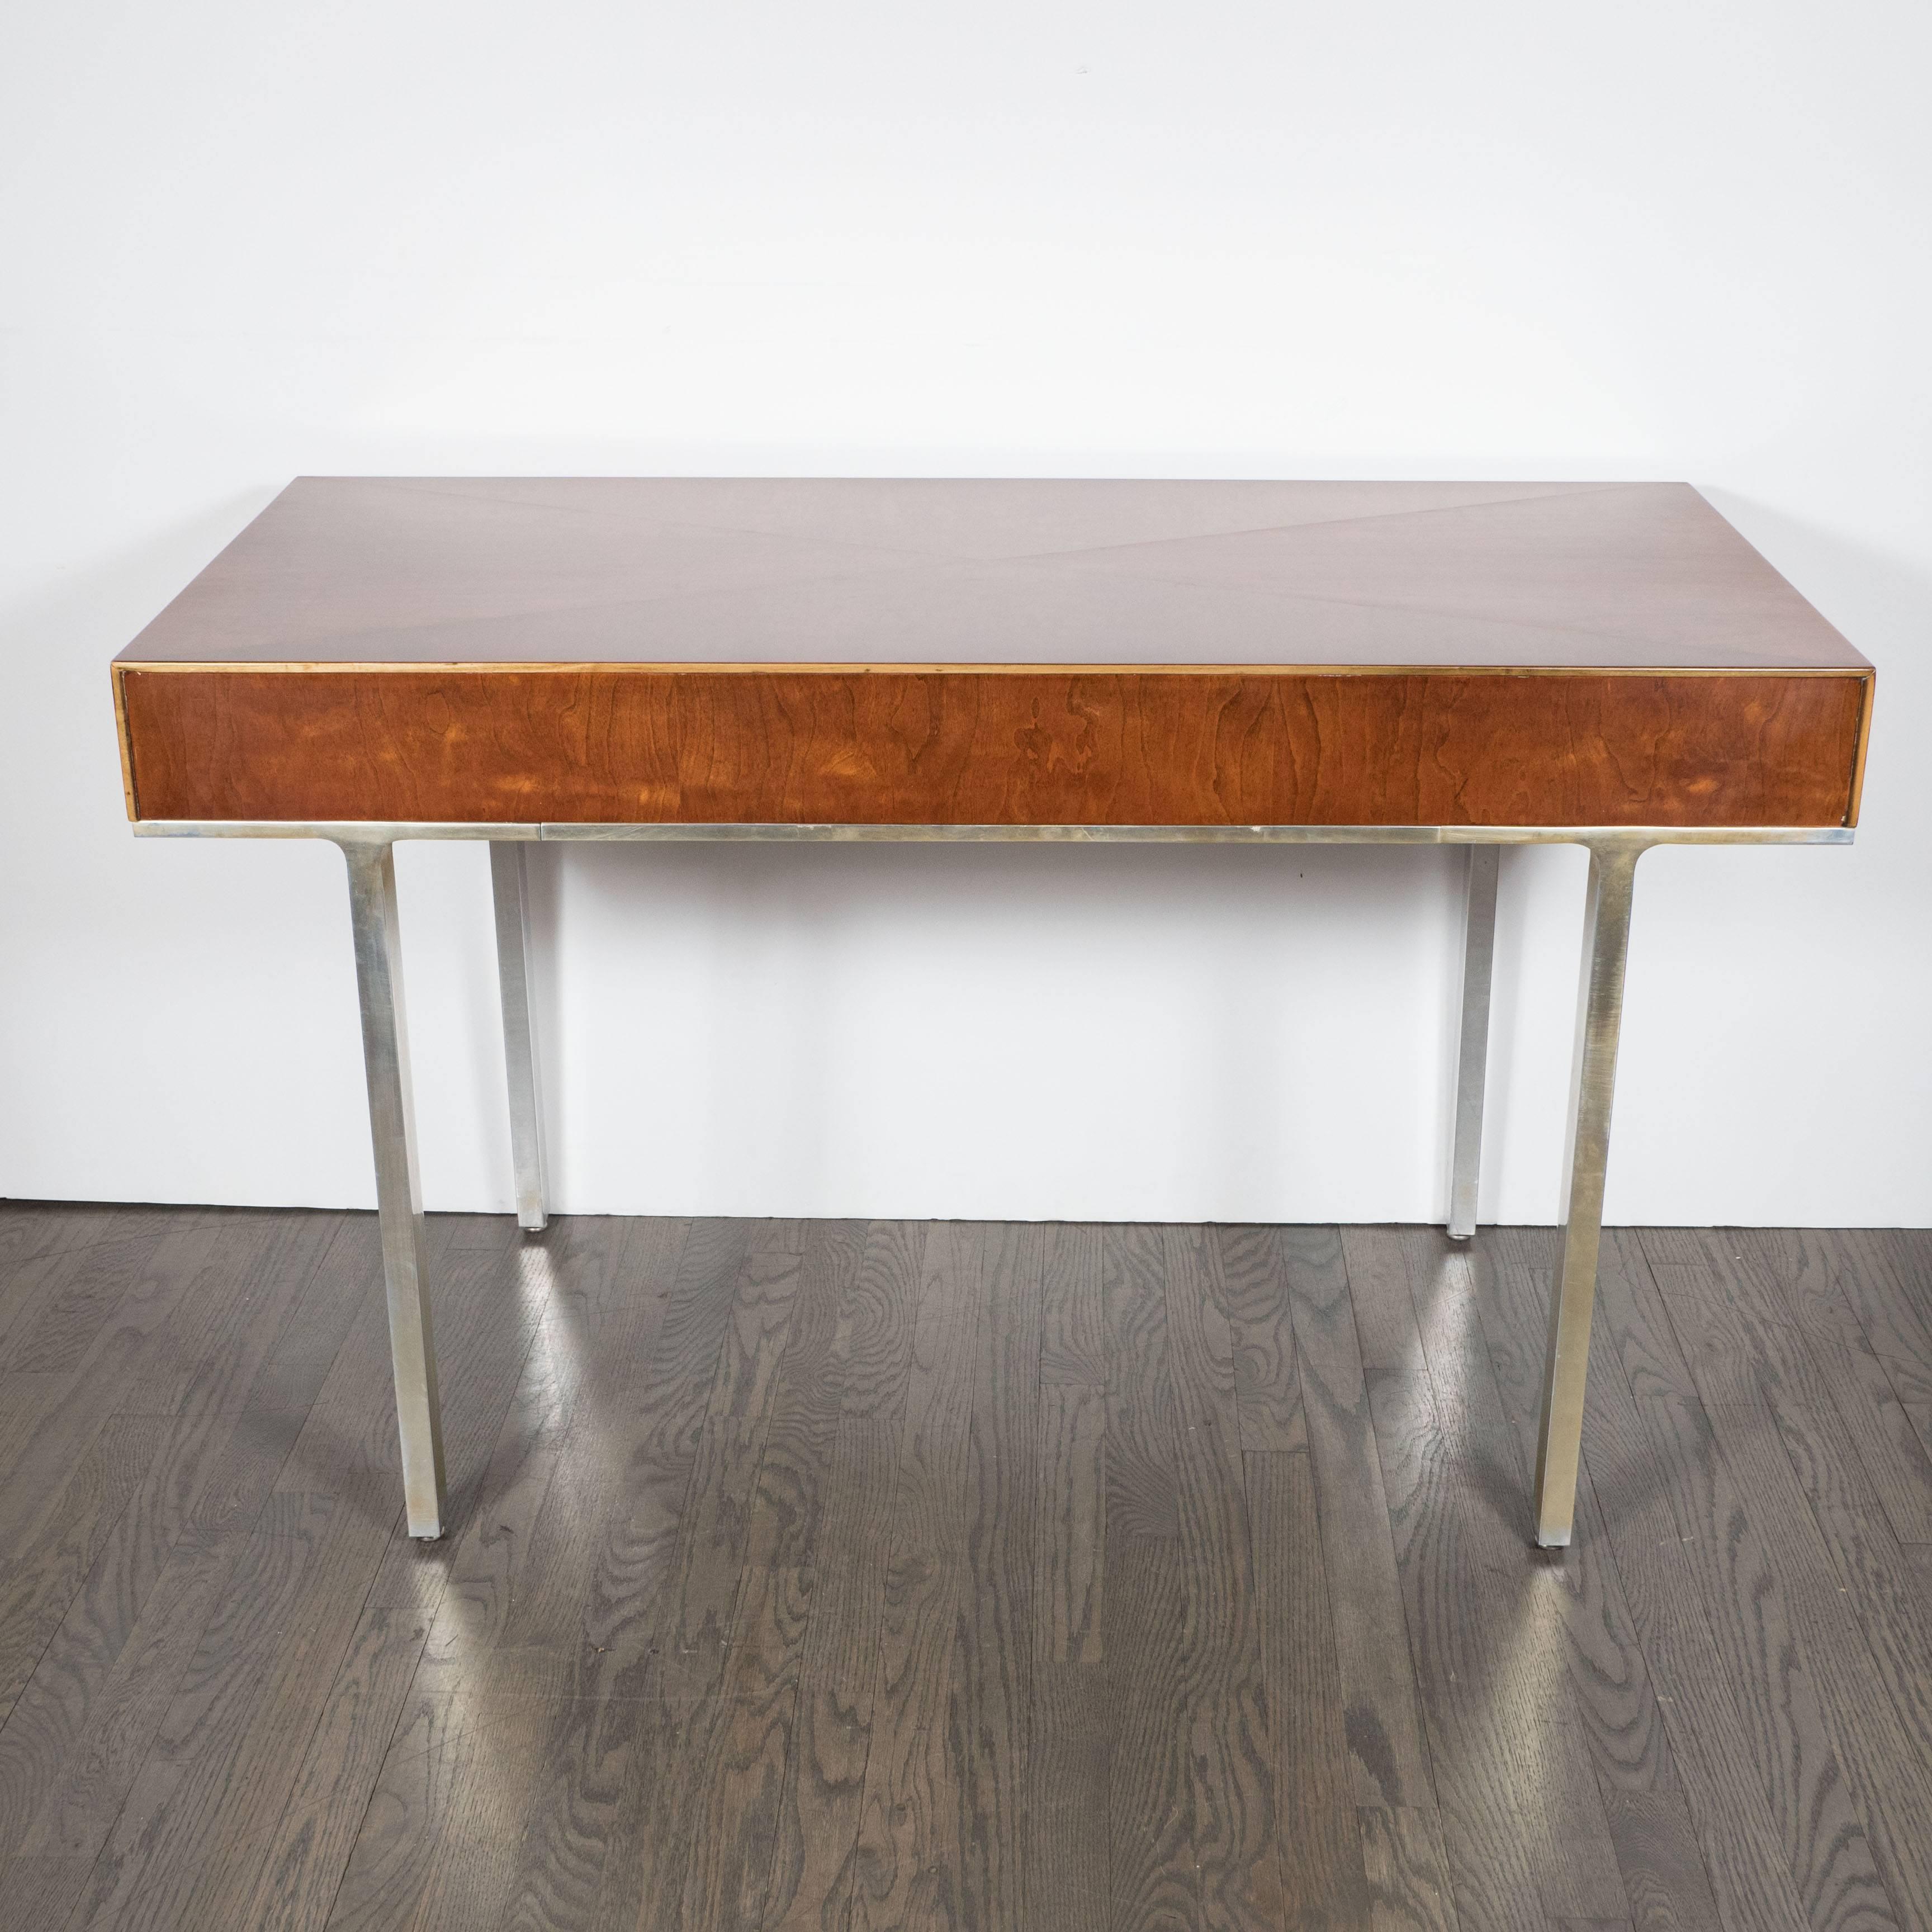 Late 20th Century Mid-Century Modern Desk in Polished Aluminum and Bookmatched Walnut, American 